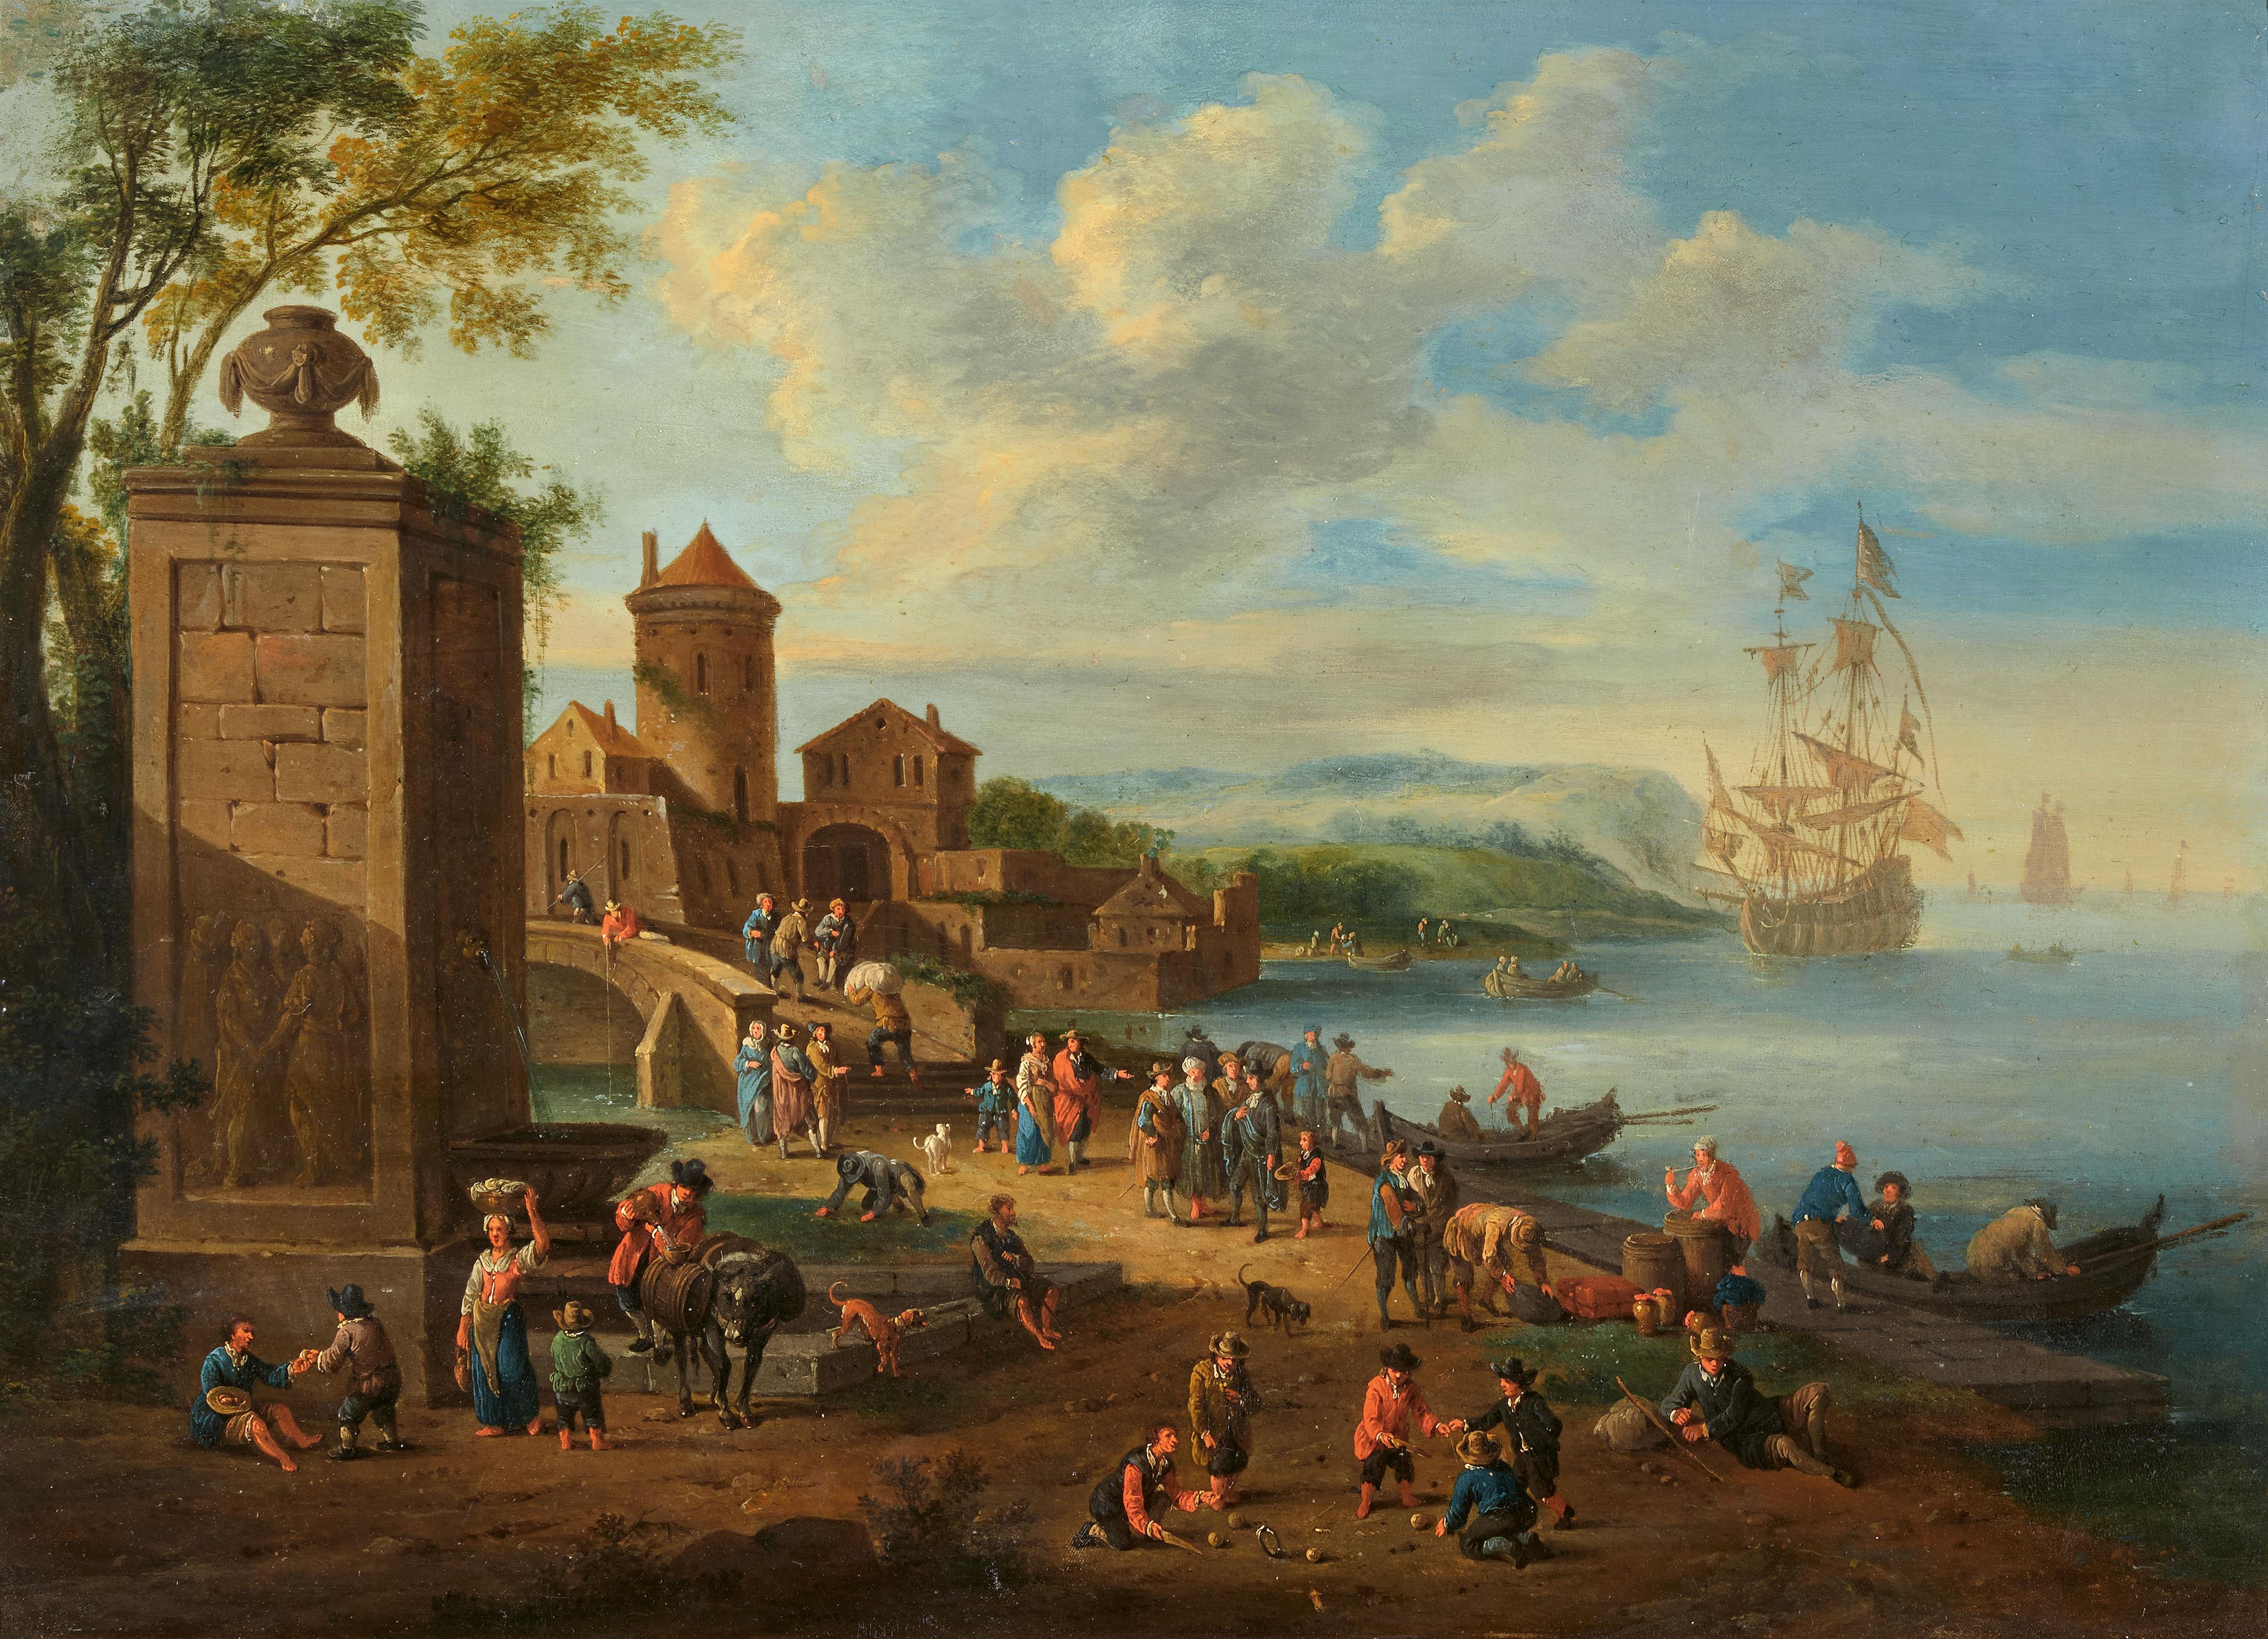 Pieter Bout - Busy Harbour Scene with a Walled City in the Background - image-1